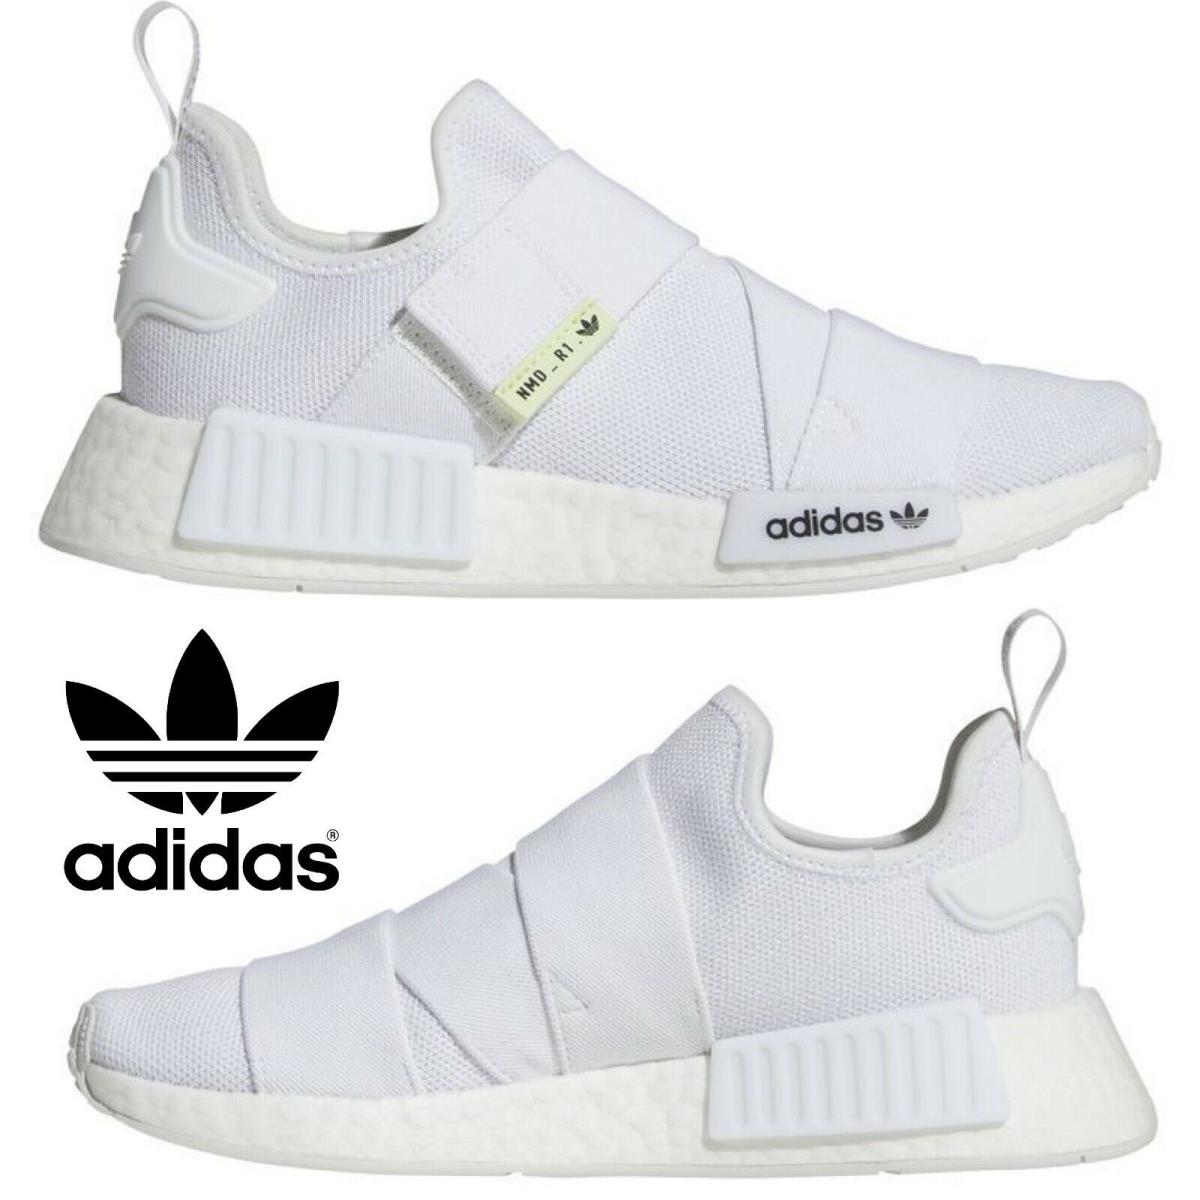 Adidas Originals Nmd R1 Laceless Women s Sneakers Casual Shoes Sport Running - White , White/White/Black Manufacturer